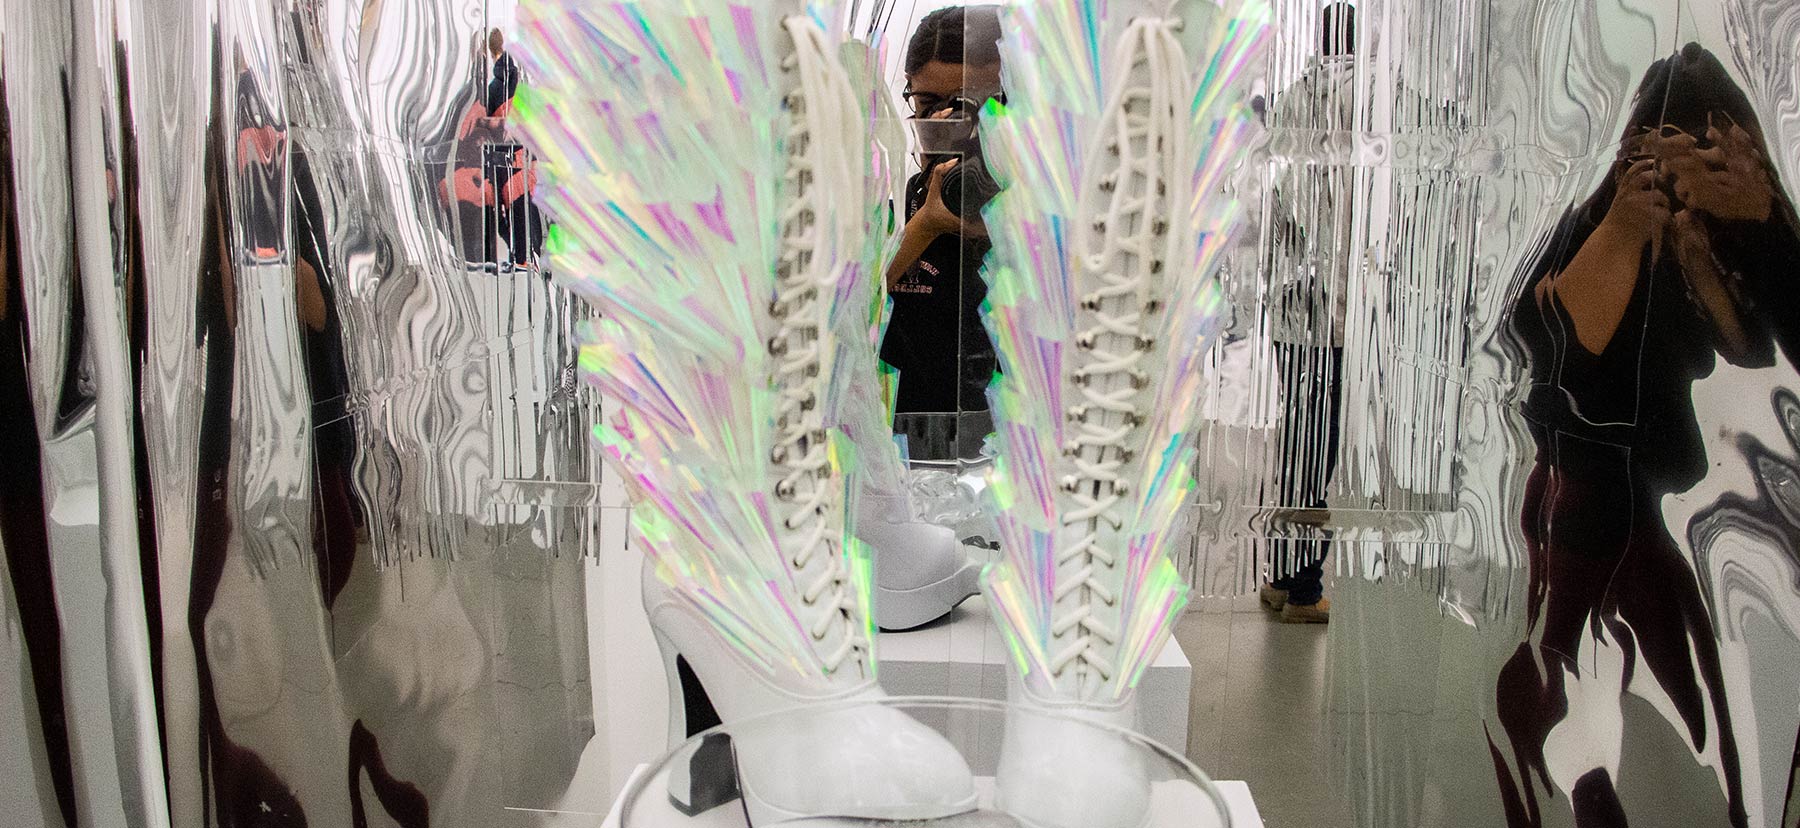 mirrored ribbons hang around boots decorated with reflective materials